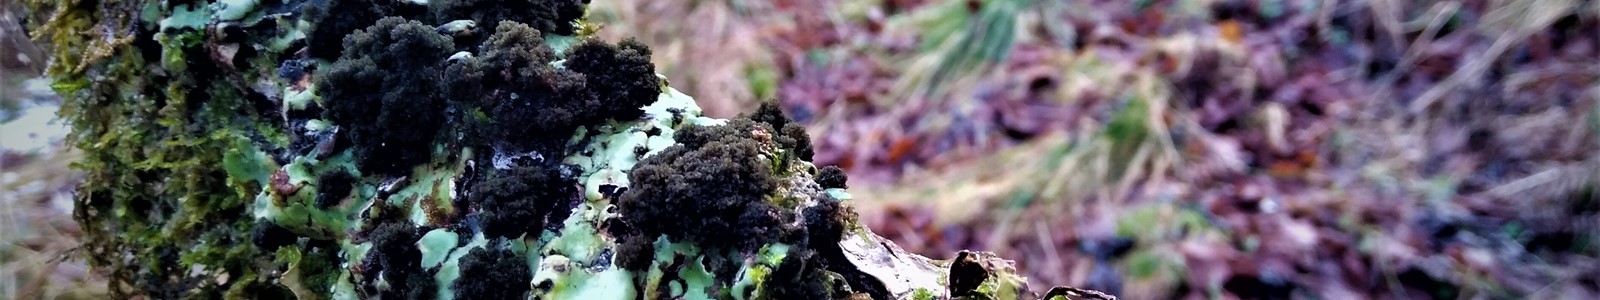 Ricasolia amplissima (formerly Lobaria amplissima) with Lobaria pulmonaria on Hazel stem - in a wintry temperate rainforest. Photo by Oliver Moore